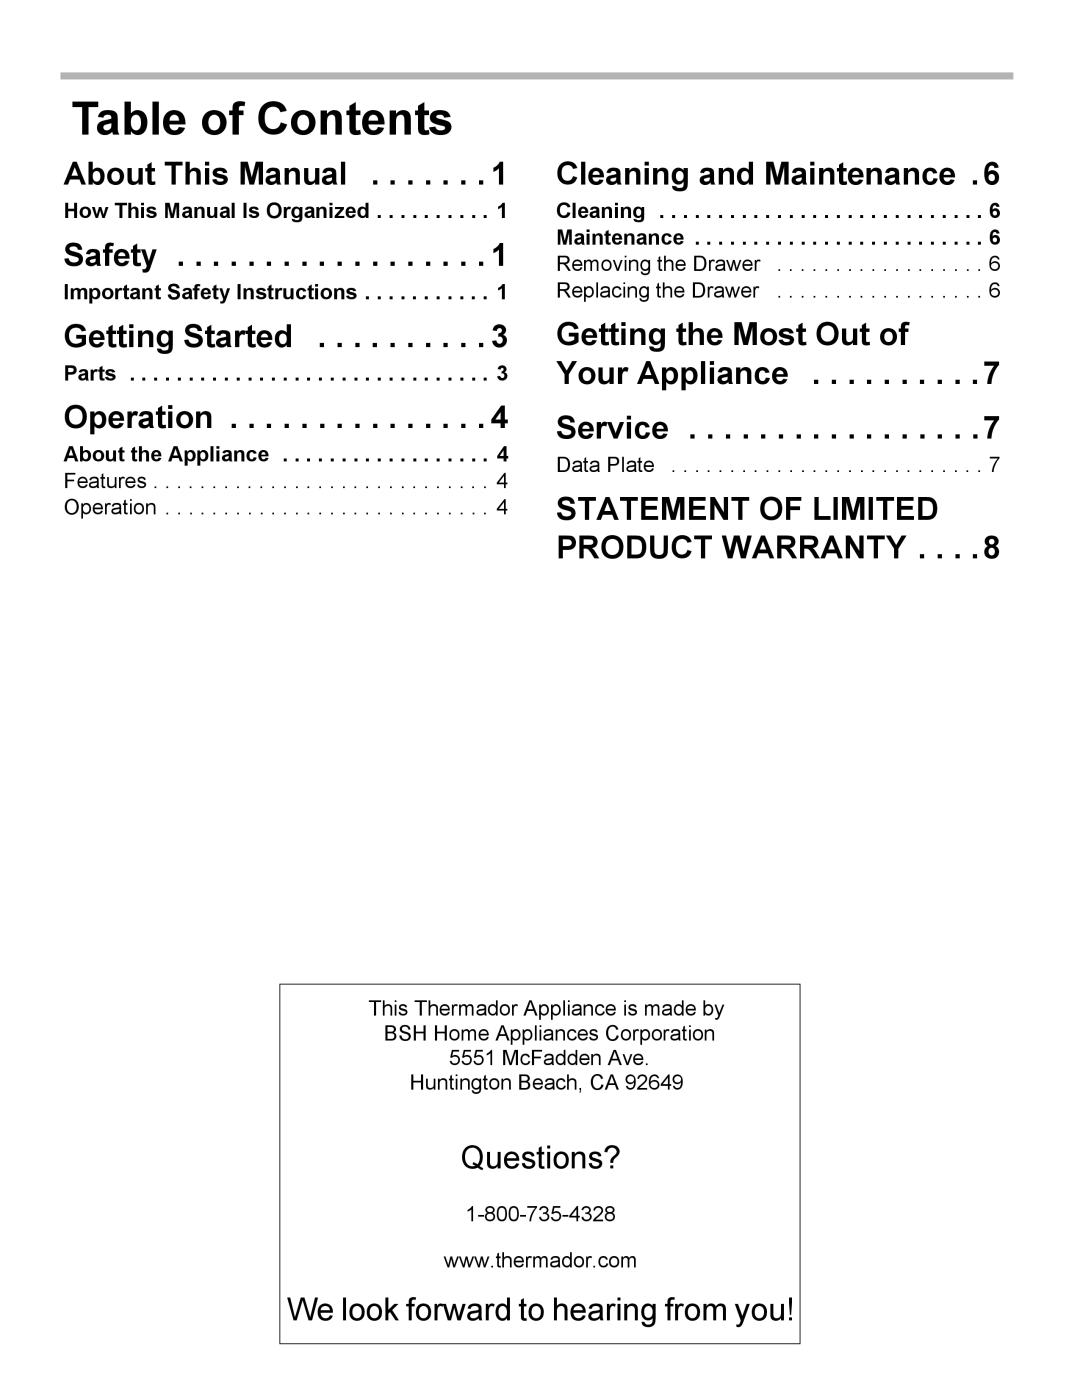 Thermador WD30 Table of Contents, About This Manual, Cleaning and Maintenance, Safety, Getting Started, Your Appliance 